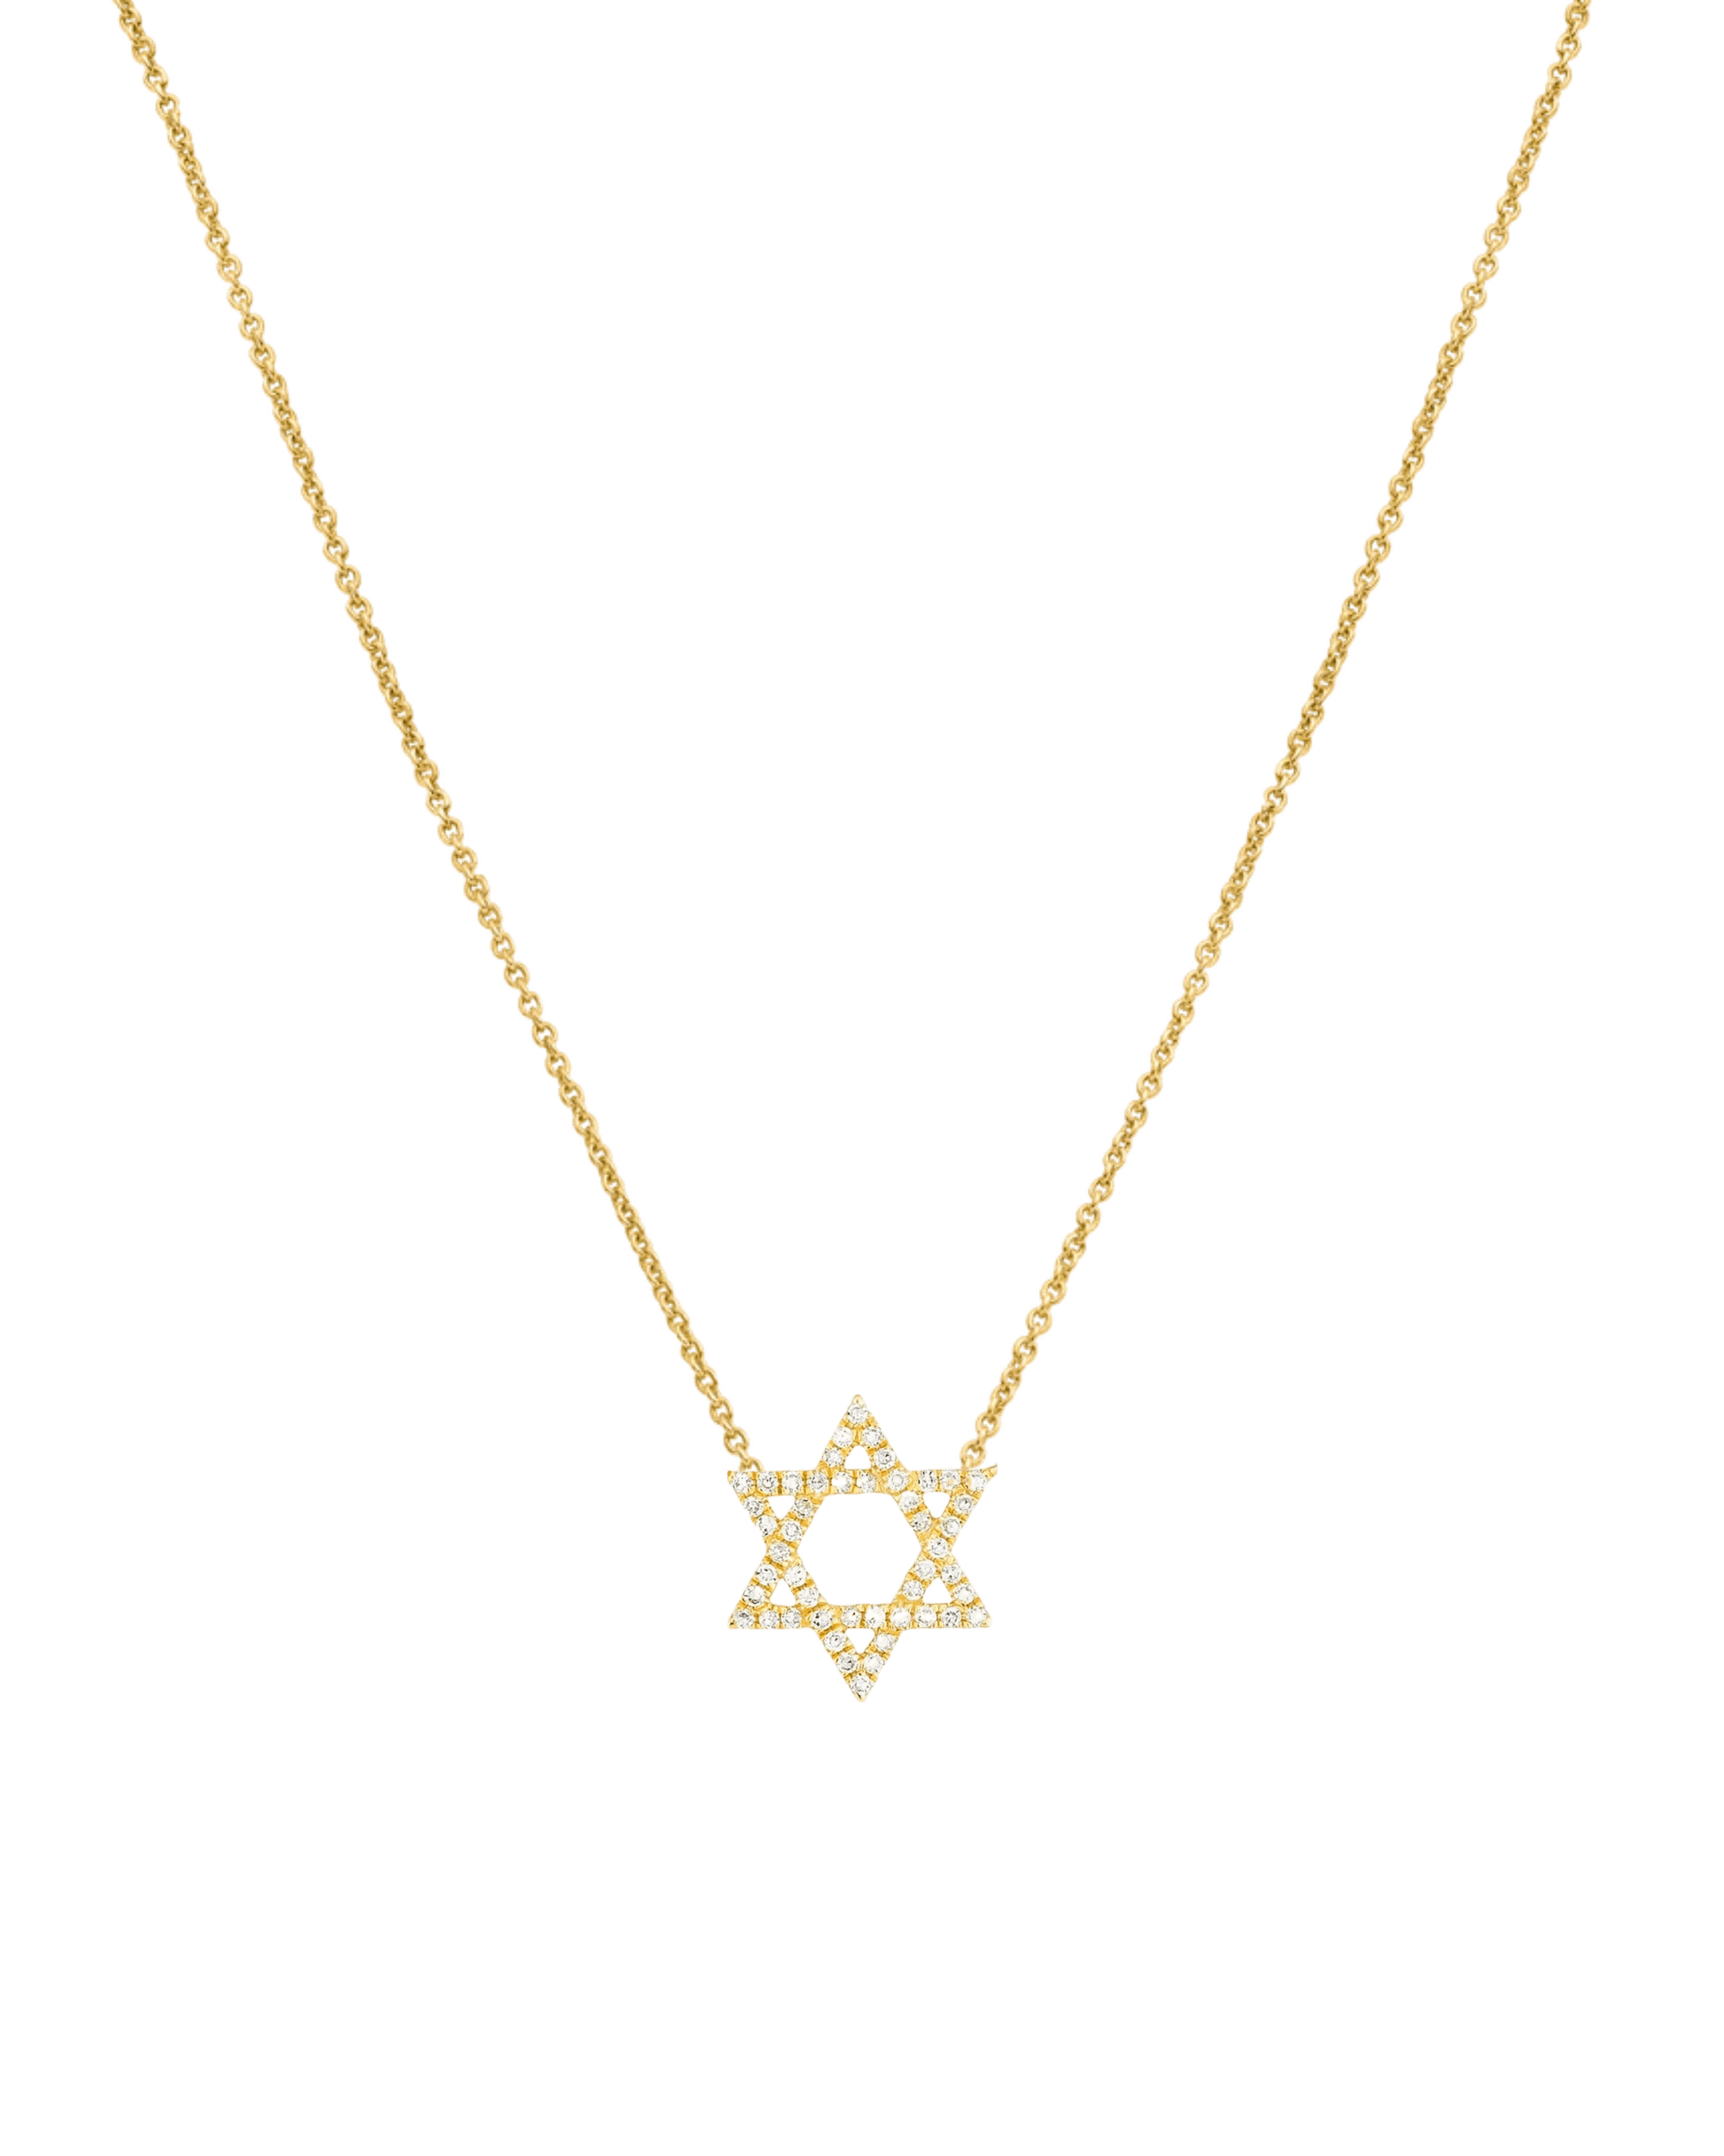 Star of David Necklace - 925 Sterling Silver Necklaces magal-dev 